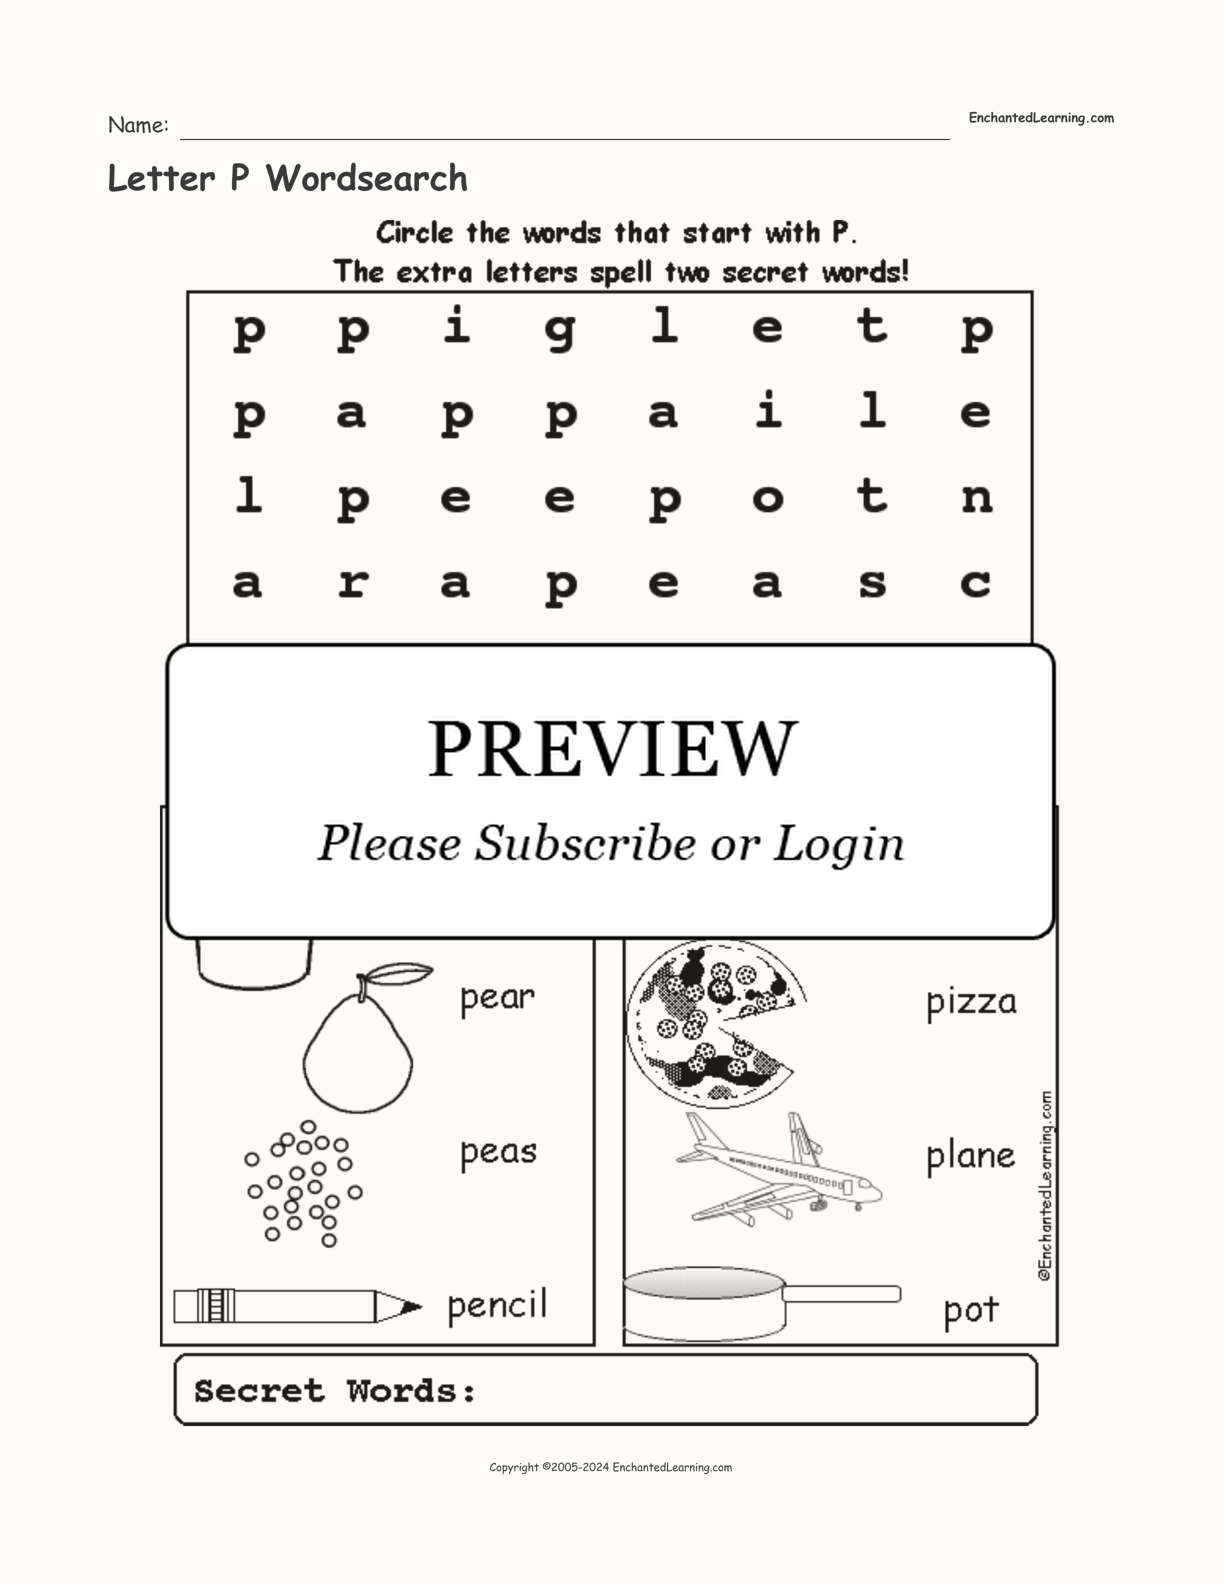 Letter P Wordsearch interactive worksheet page 1